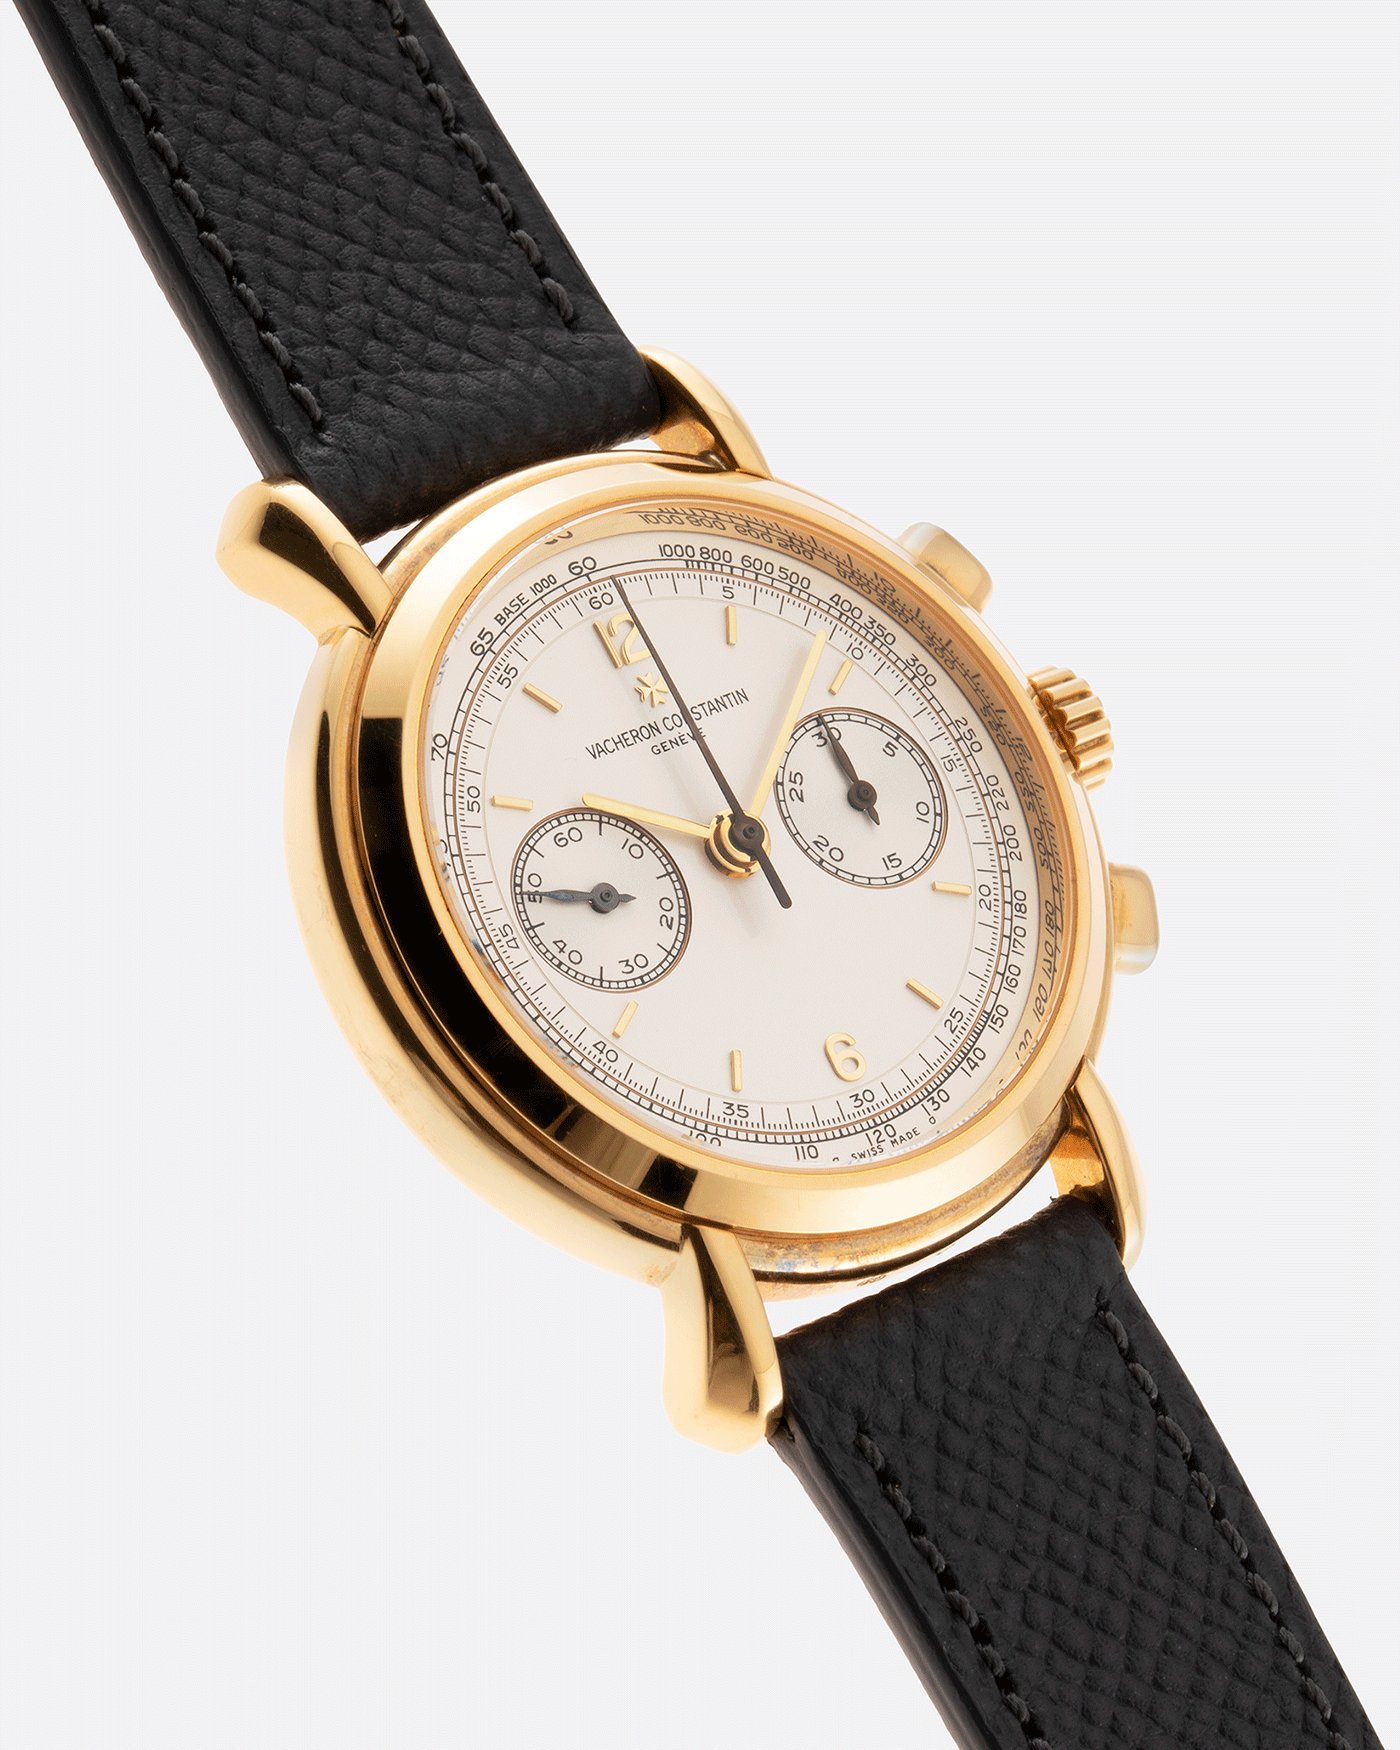 Brand: Vacheron Constantin Year: 1990’s Model: Les Historiques Chronograph Reference Number: 47101 Material: 18k Yellow Gold Movement: Lemania 2320 Based Cal. 1141 Case Diameter: 37mm Bracelet: Molequin Anthracite Textured Calf with 18k Yellow Gold Tang Buckle